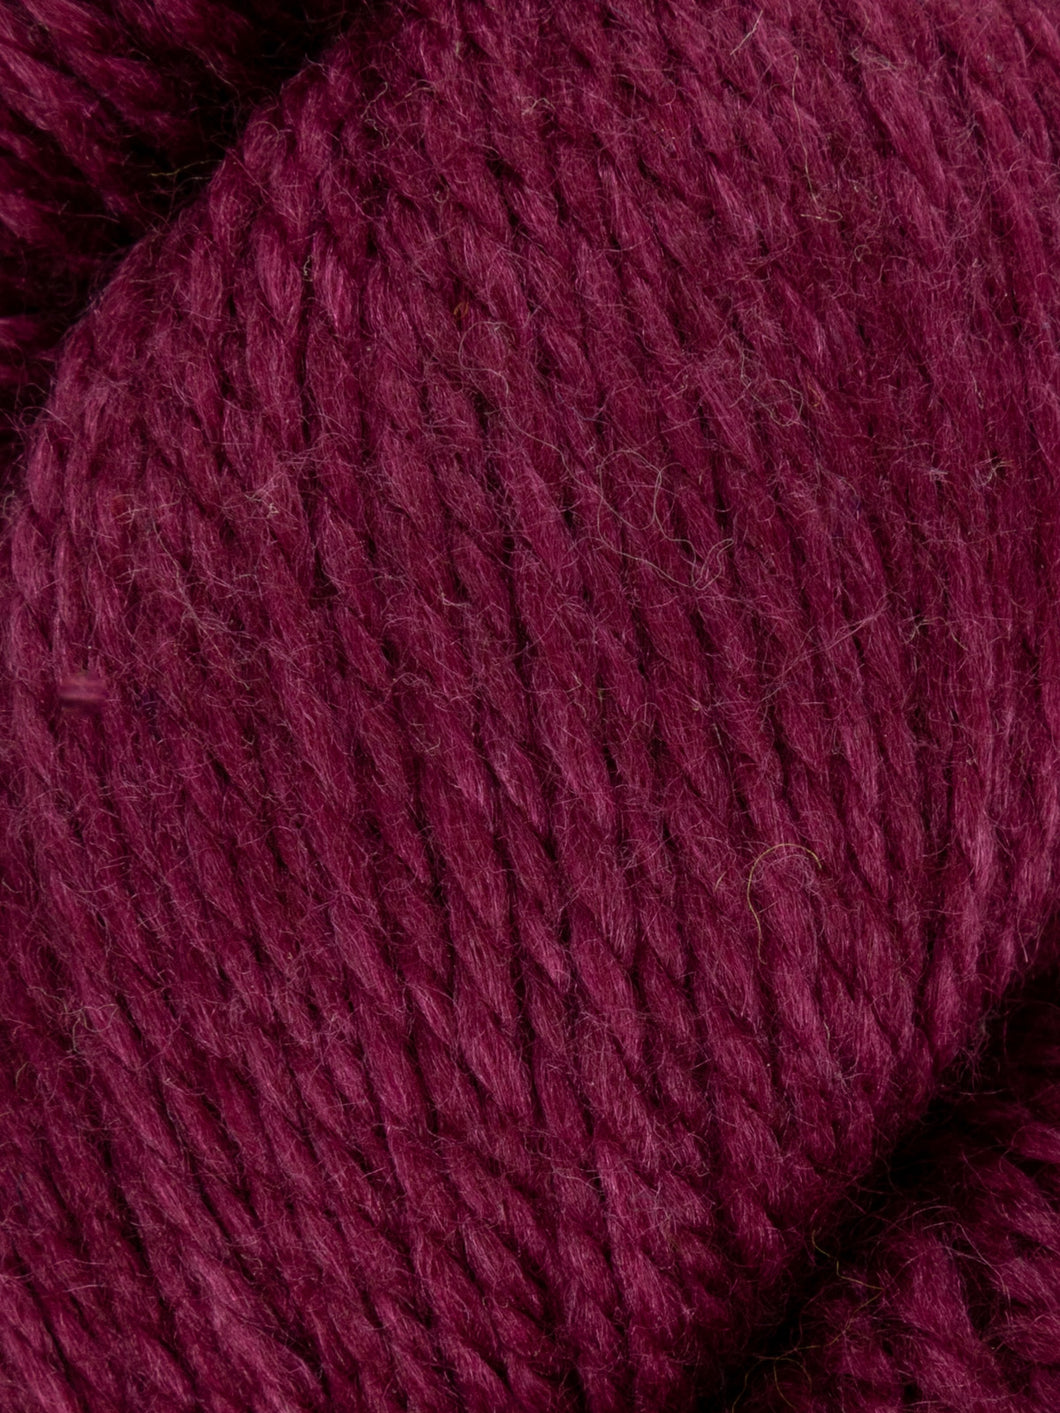 West Yorkshire Spinners - Exquisite 4 Ply